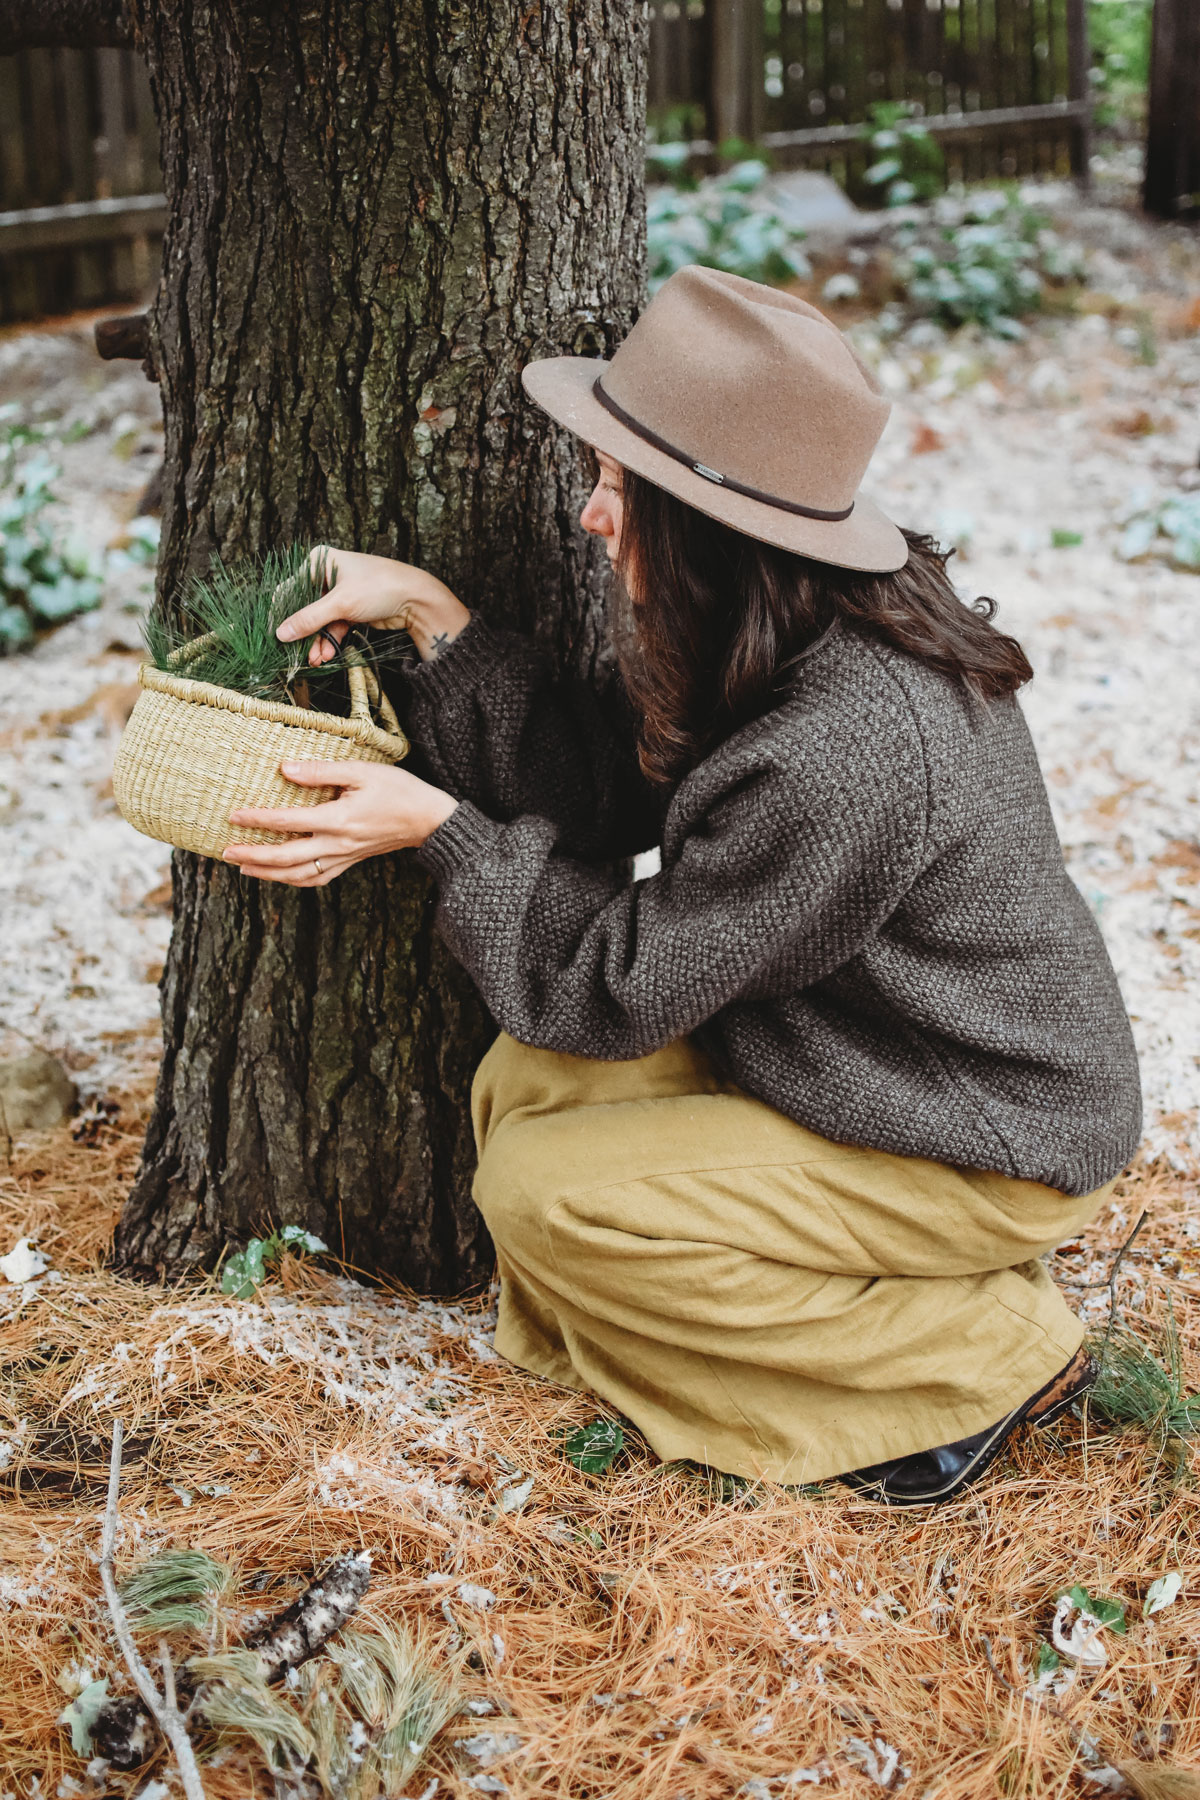 Winter foraging is a great excuse to get outdoors during winter months.